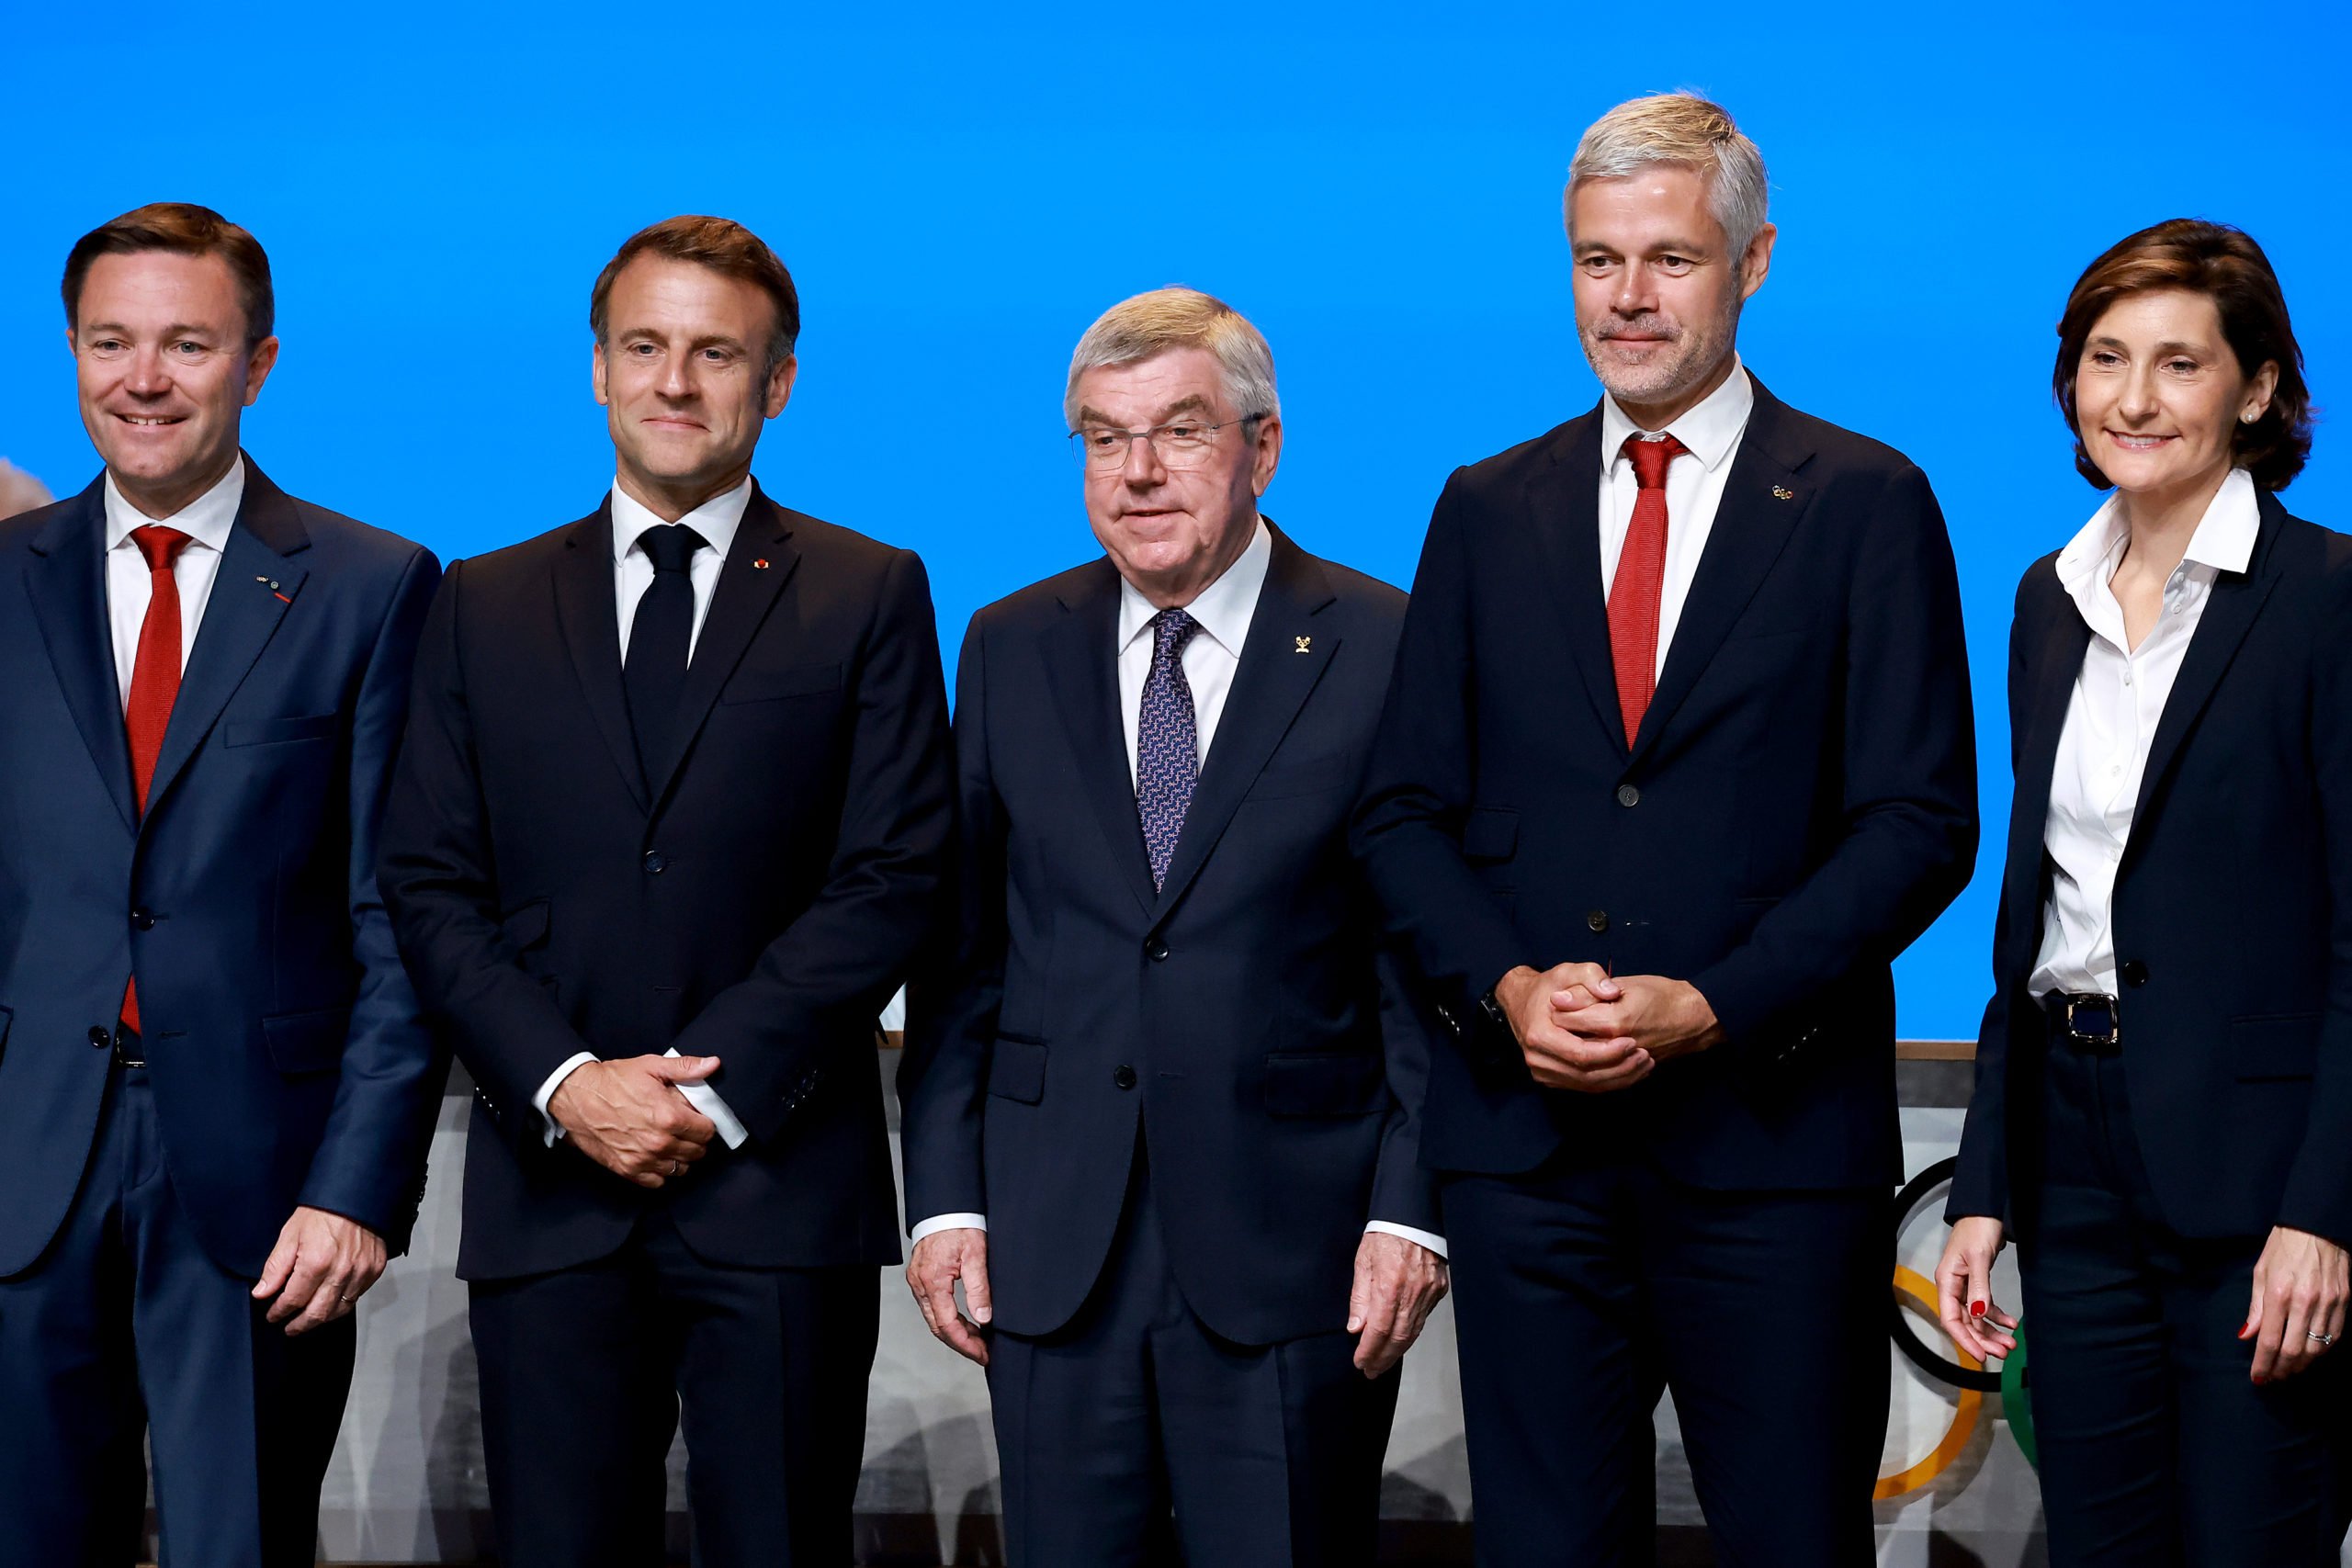 French Alps 2030 delegation members poses with International Olympic Committee (IOC) President Thomas Bach and French President Emmanuel Macron. (Photo by Arturo Holmes/Getty Images)